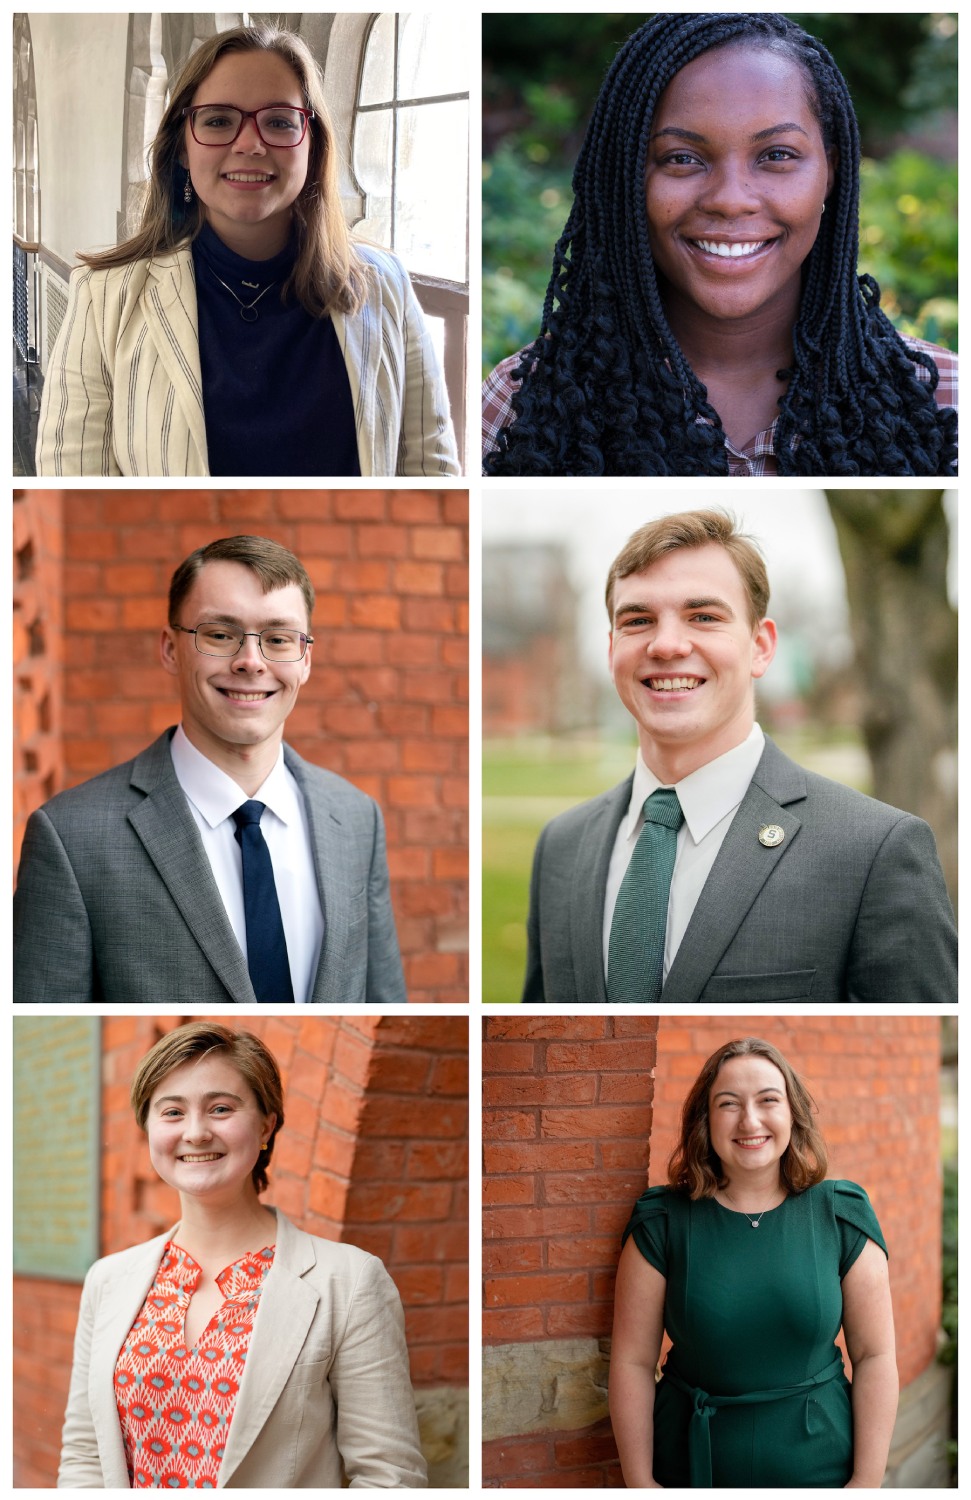 Portraits of the six scholarship nominees